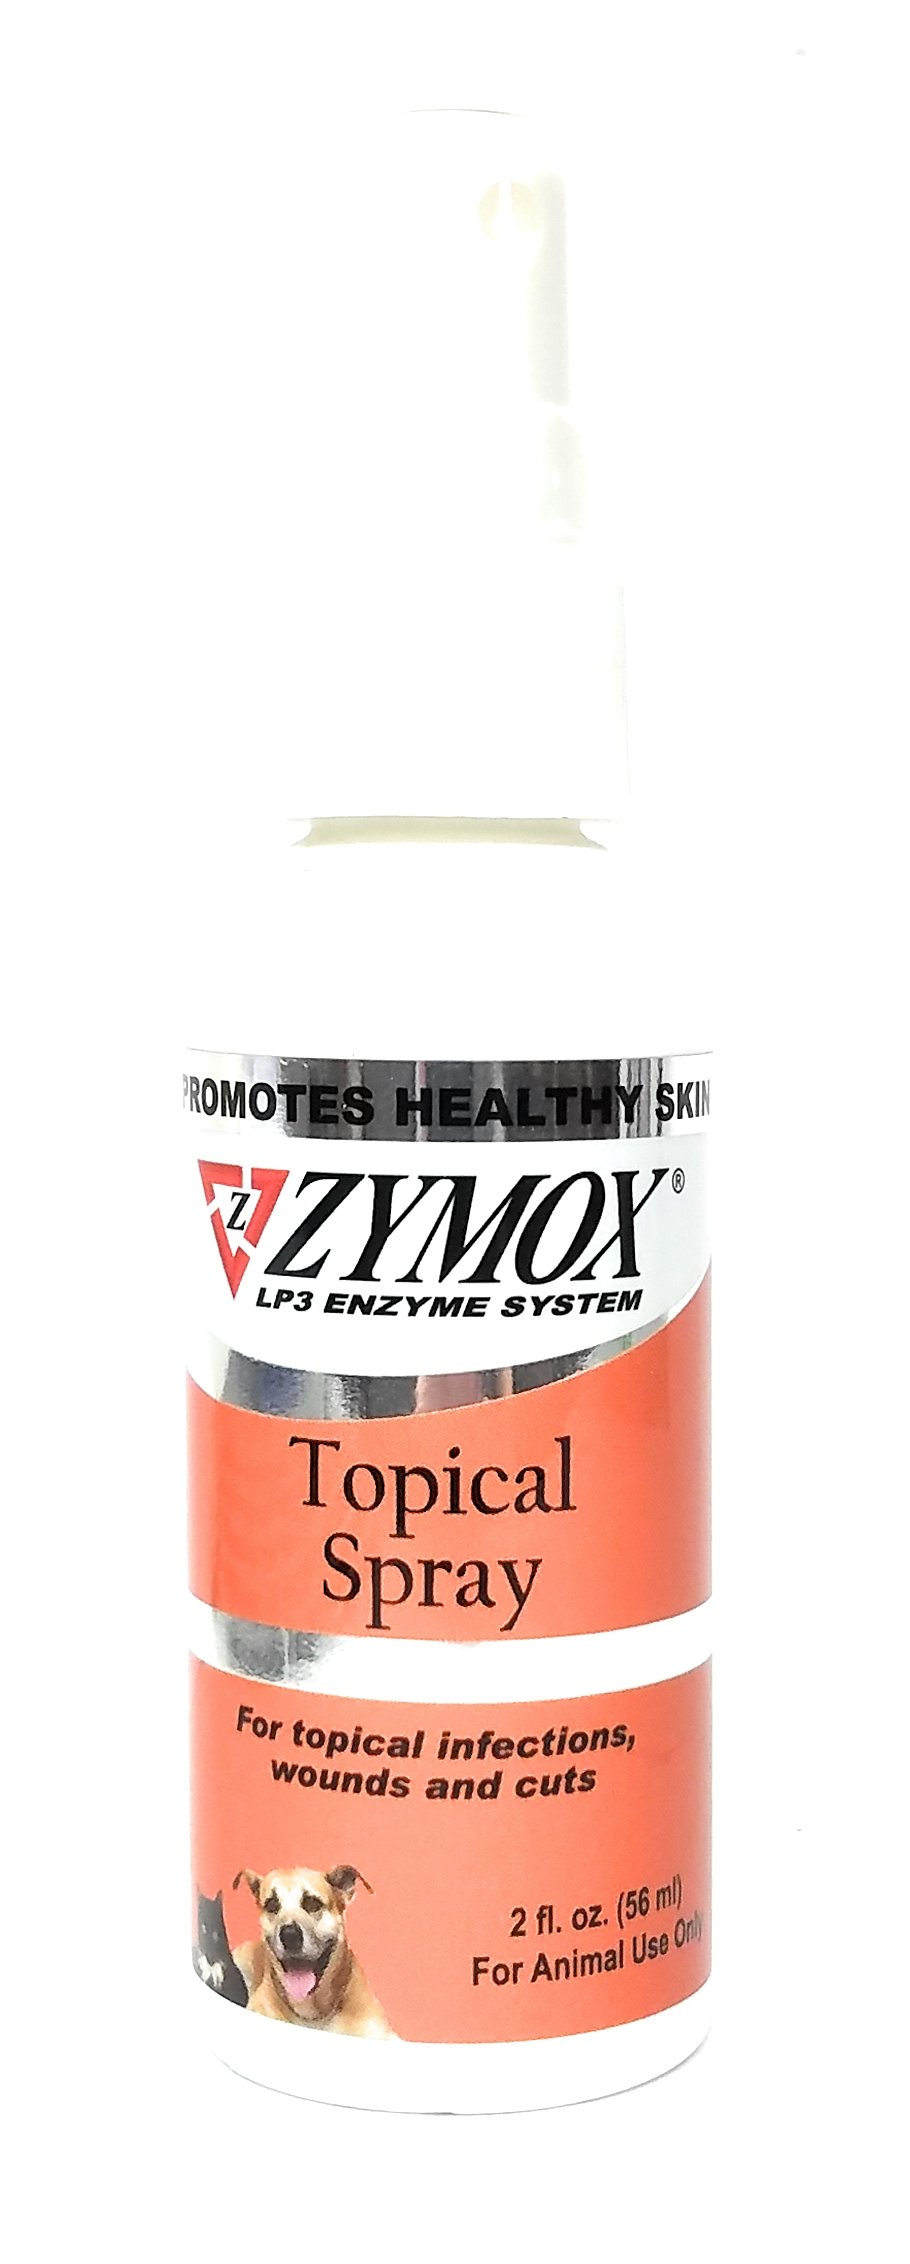 Zymox Topical Spray Hydrocortisone Free -2 oz bottle for Pets